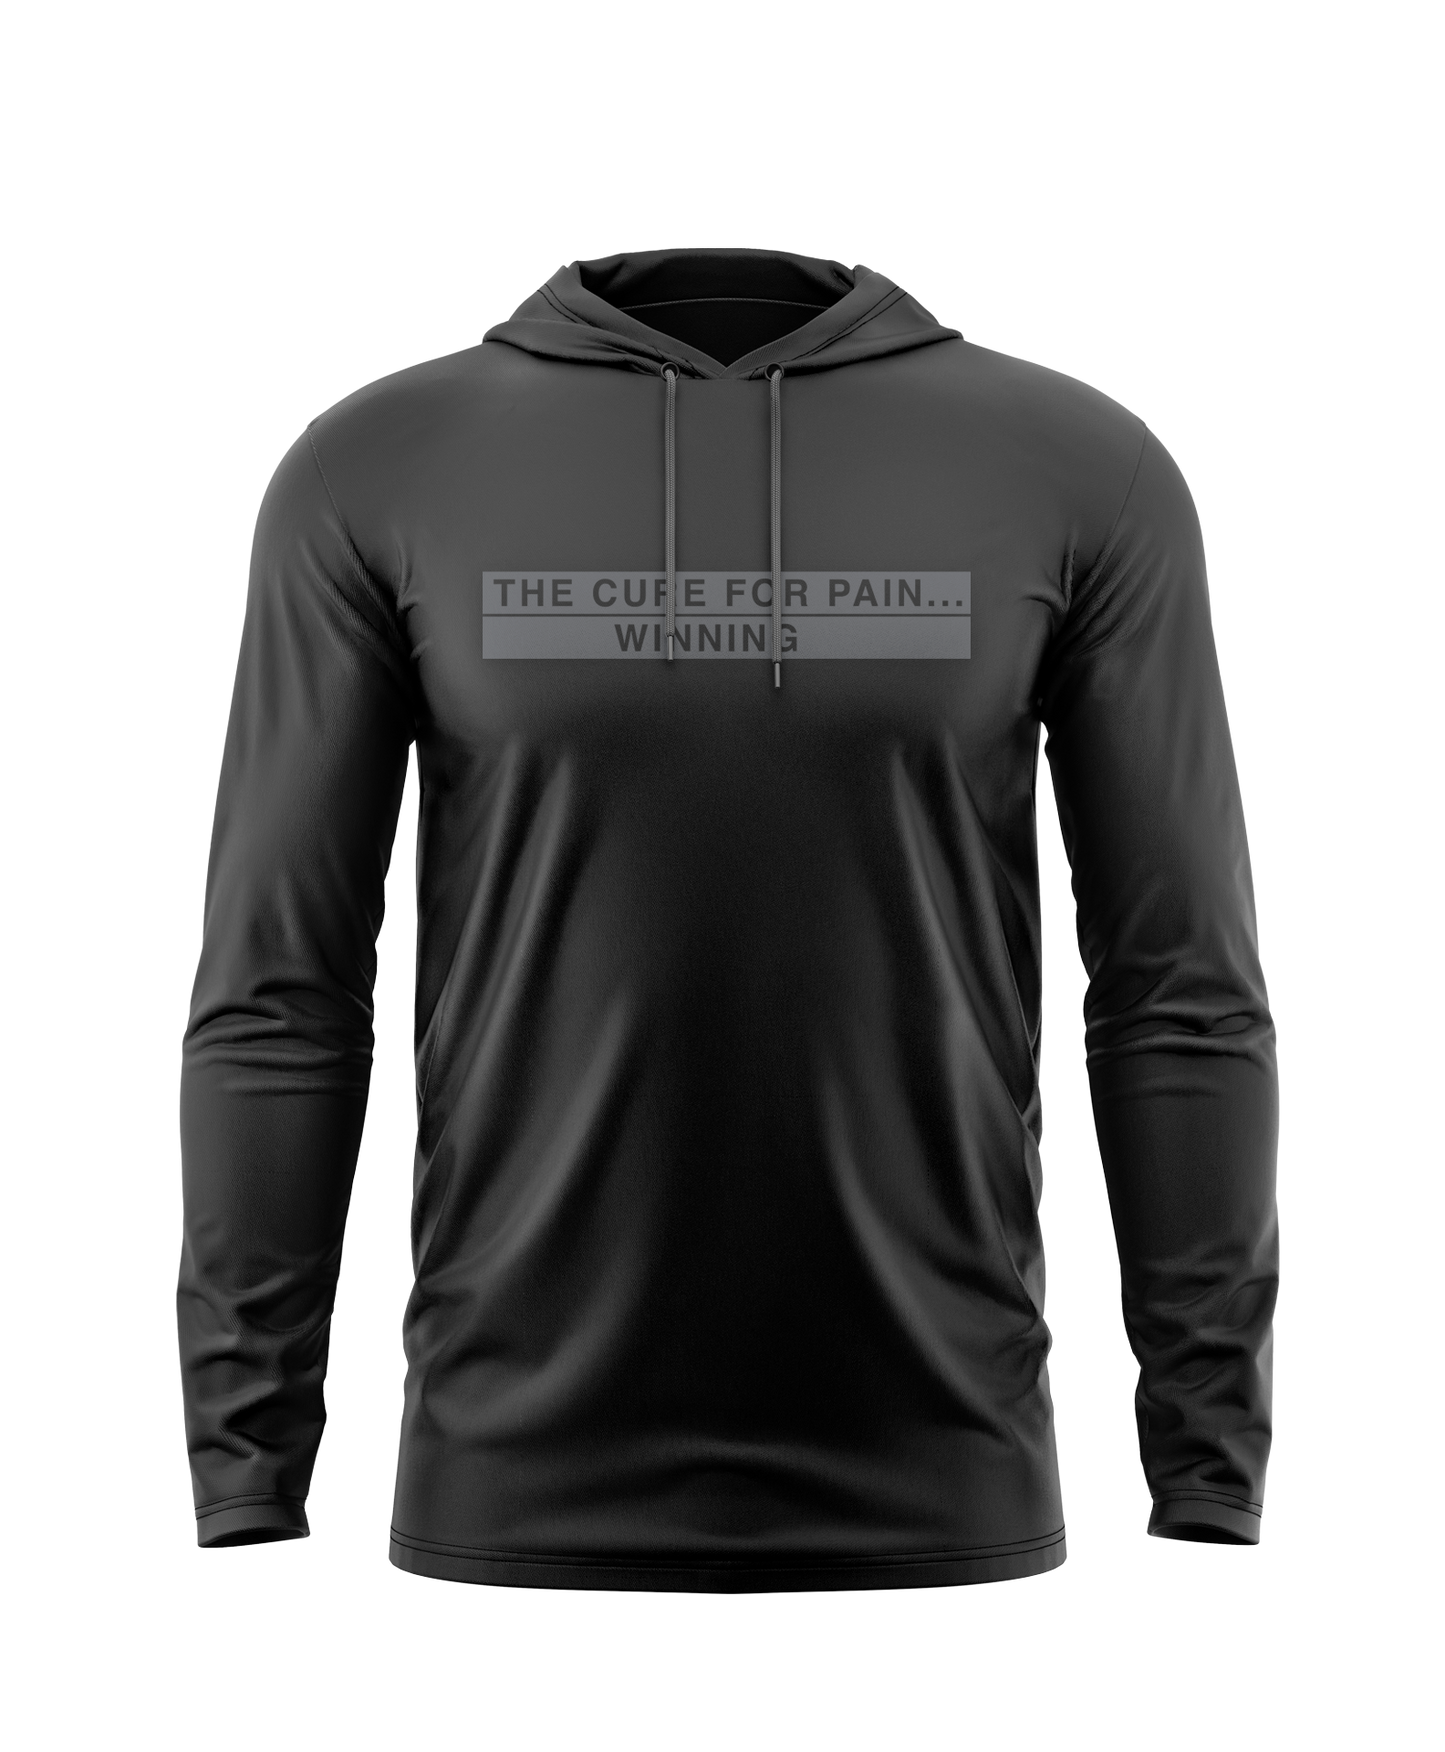 The Cure For Pain "Black Collection" Athletic Hoodie